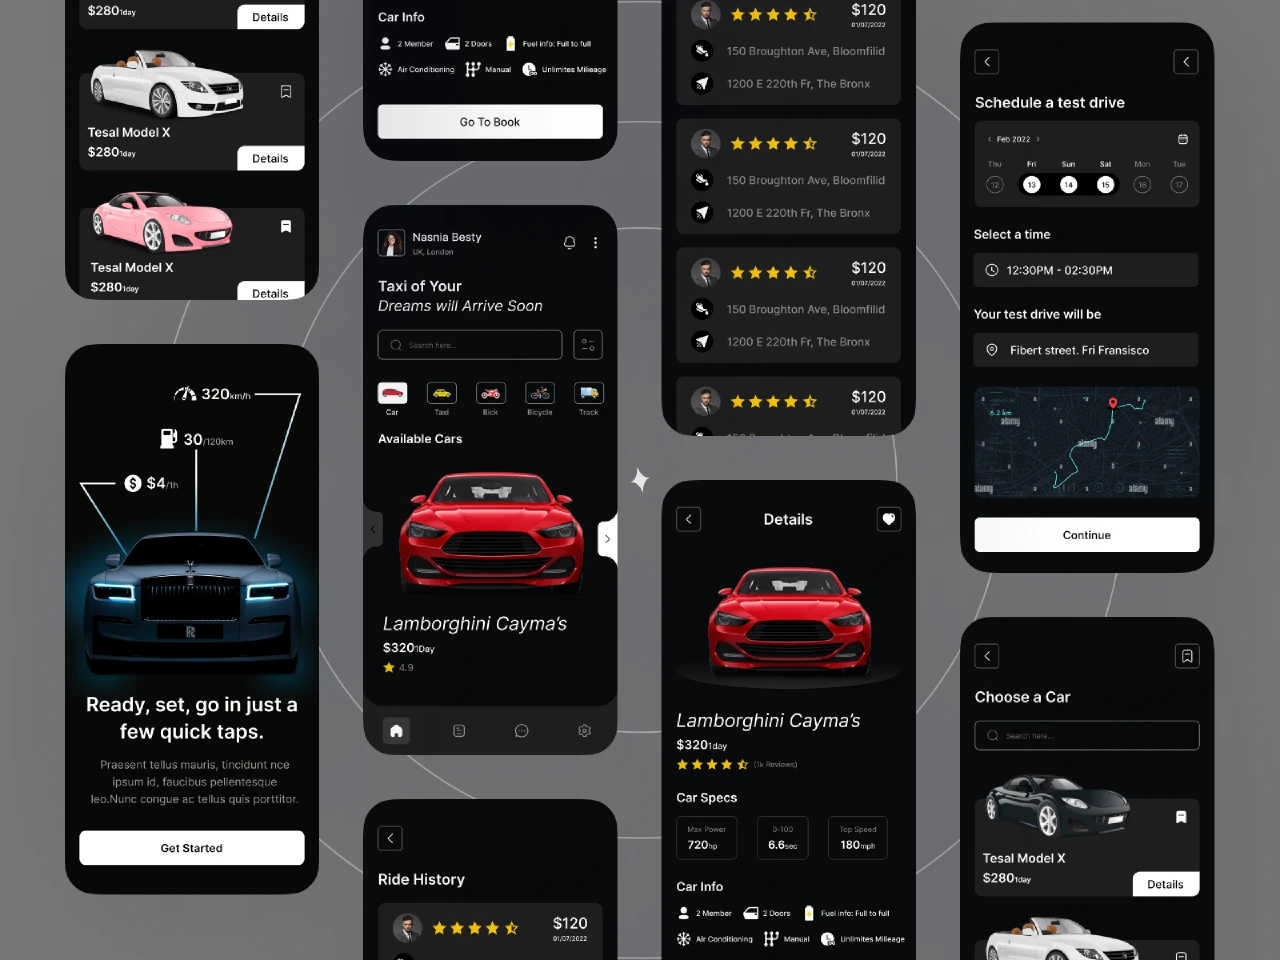 Application. Rental Car App for Figma and Adobe XD